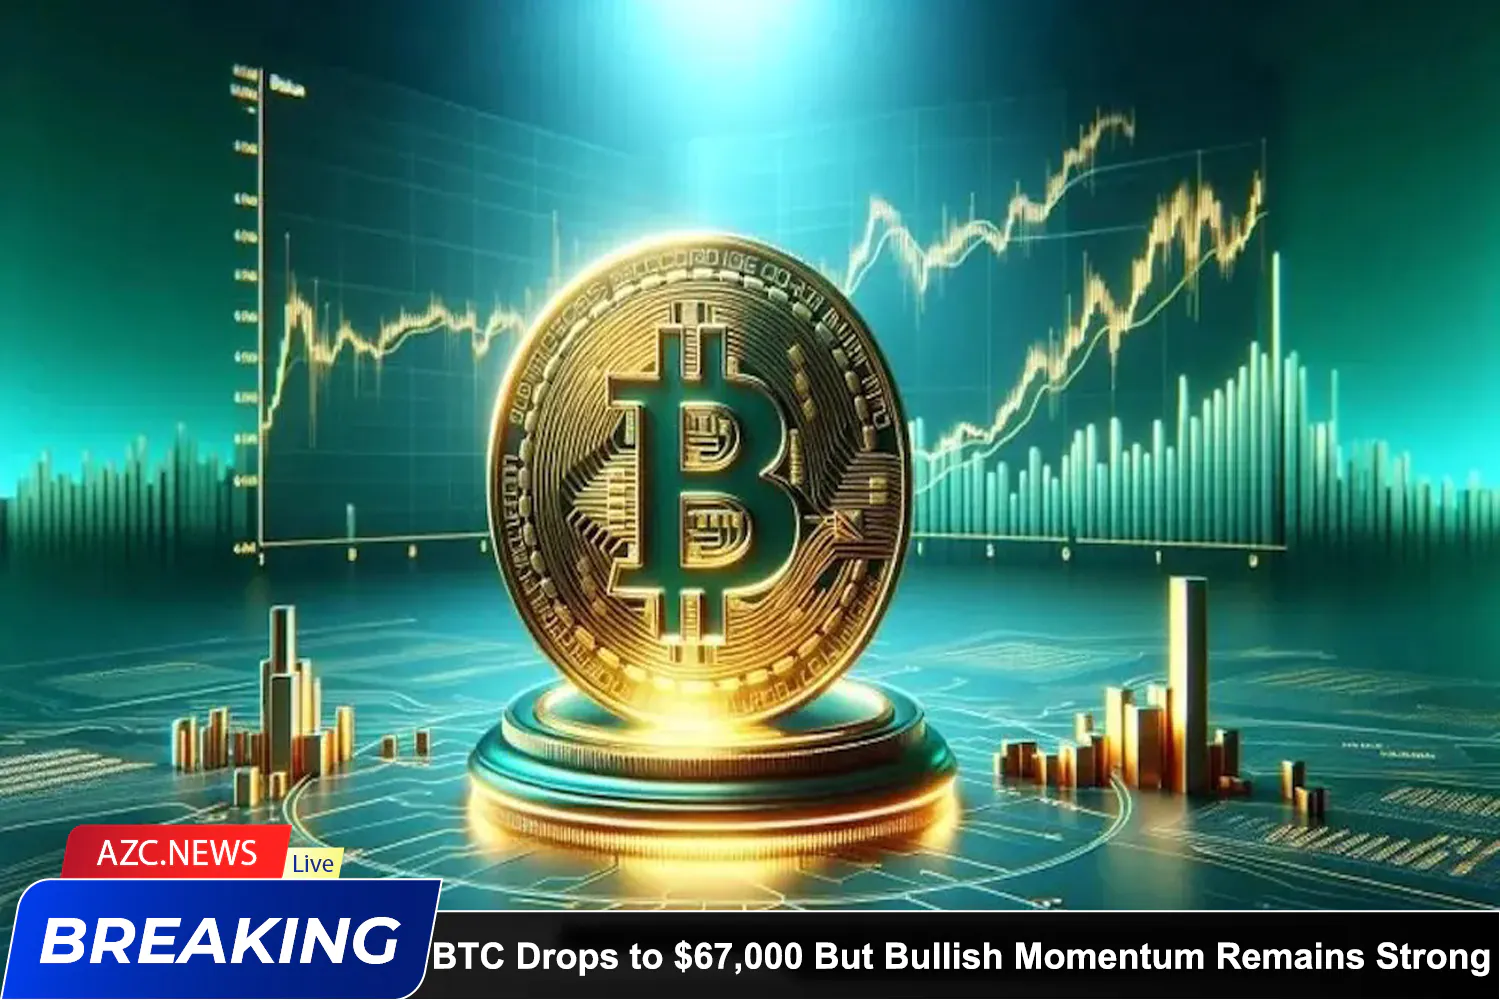 Azcnews Bitcoin Drops To $67,000 But Bullish Momentum Remains Strong